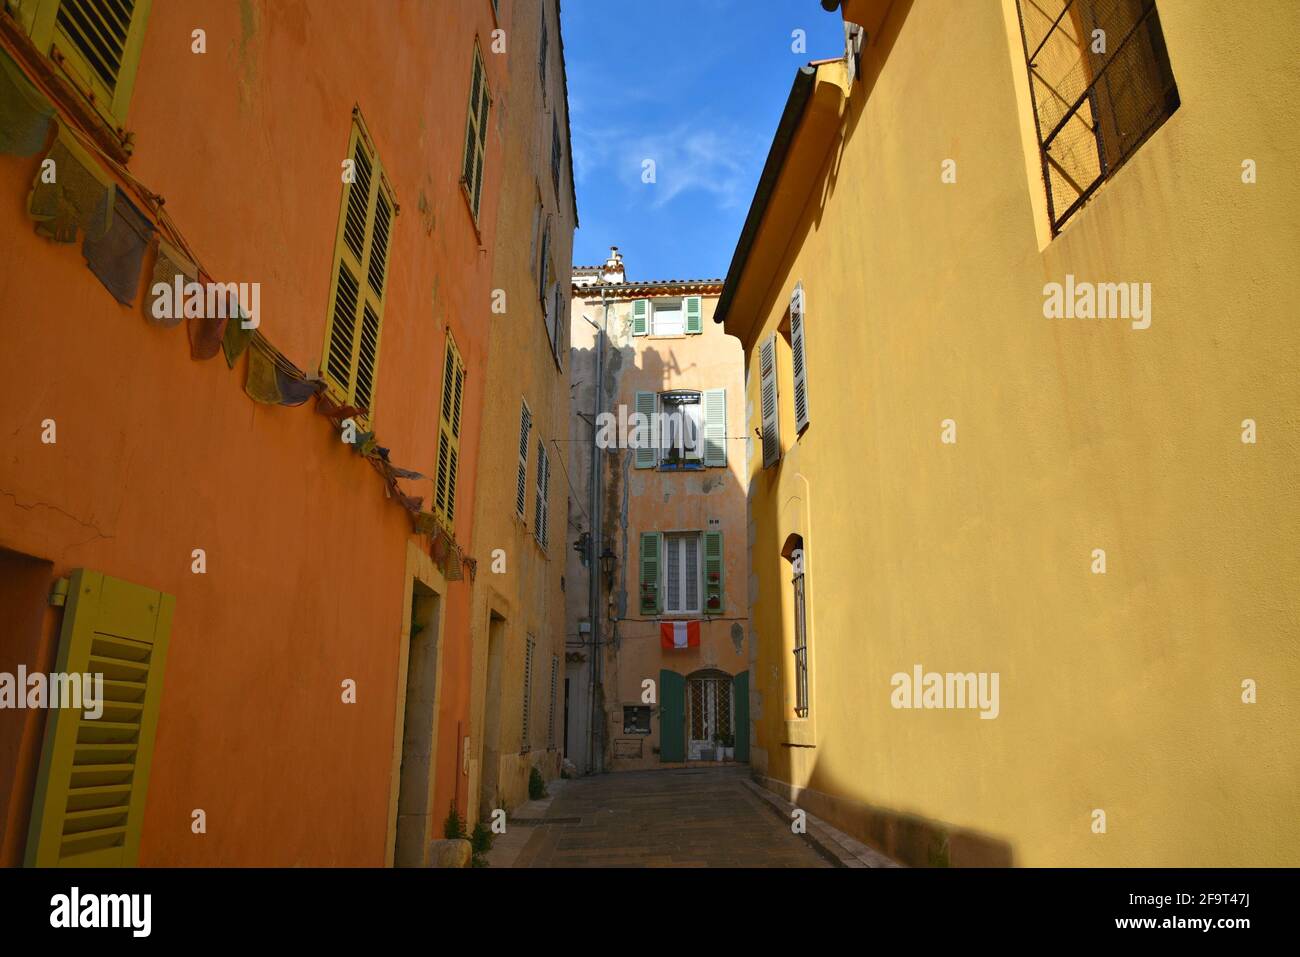 Typical Provençal style houses with ochre stucco walls in the historic center of Saint-Tropez, French Riviera France. Stock Photo